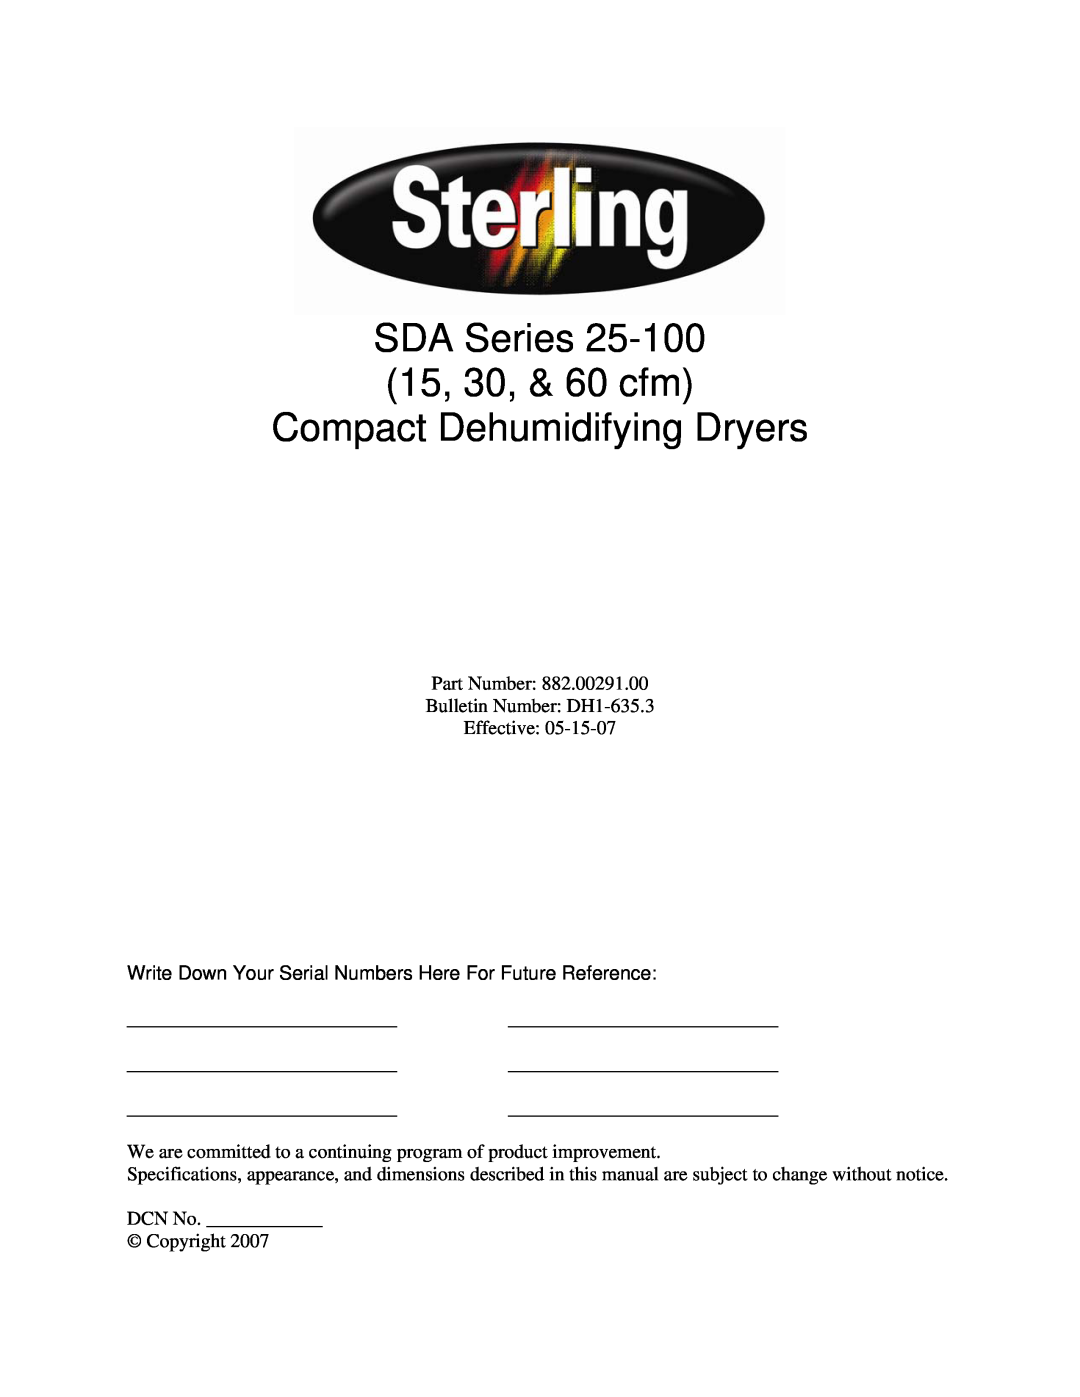 Sterling 882.00291.00 specifications SDA Series 15, 30, & 60 cfm, Compact Dehumidifying Dryers 